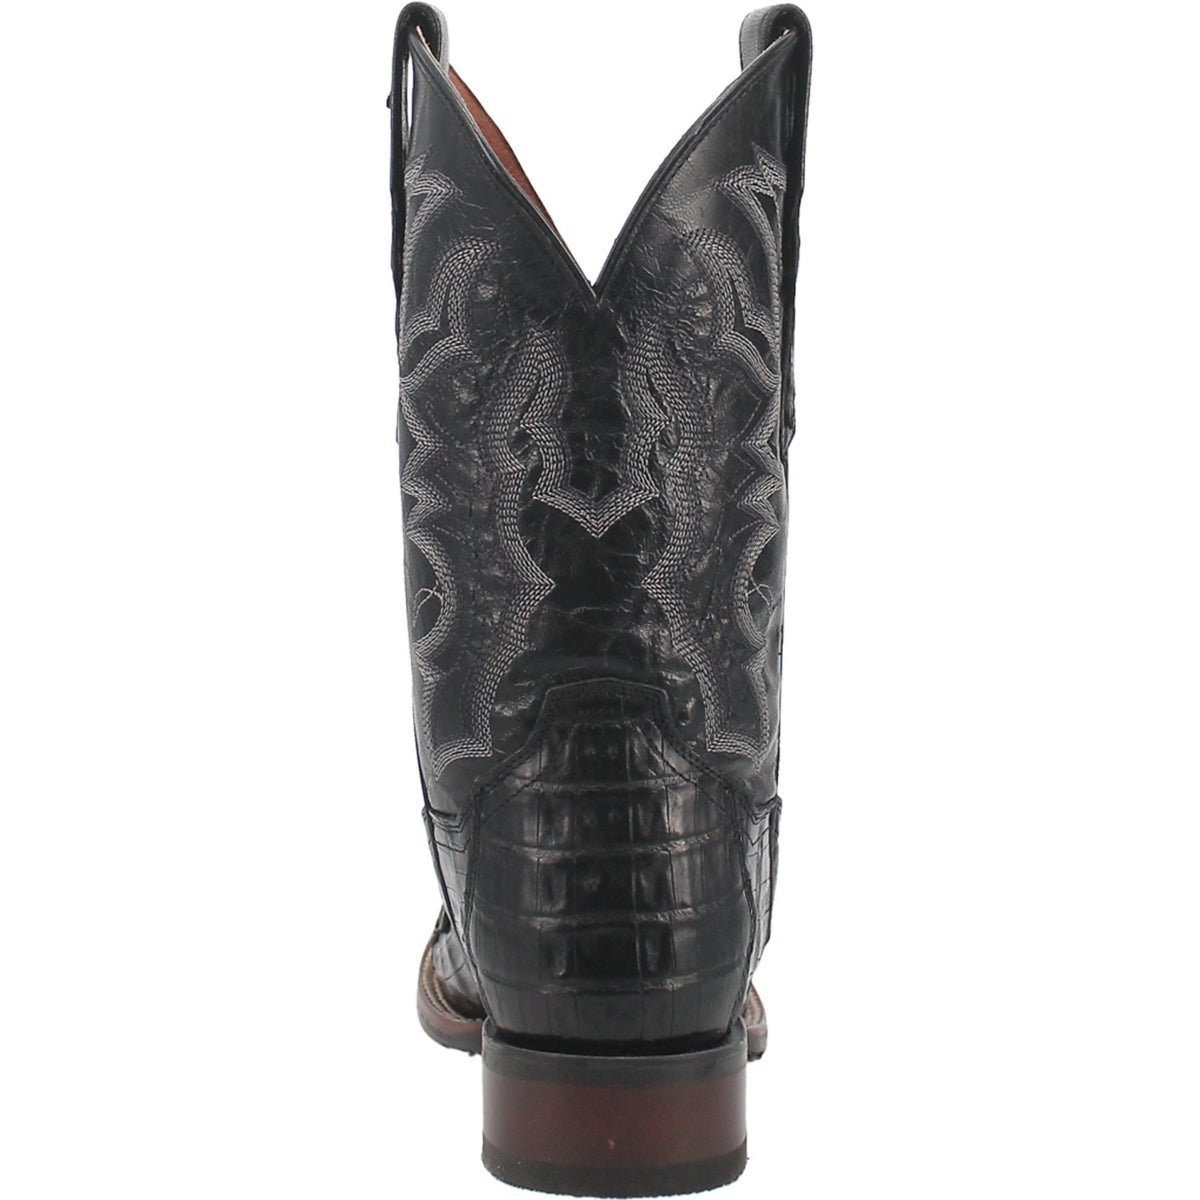 KINGSLY CAIMAN BOOT Cover